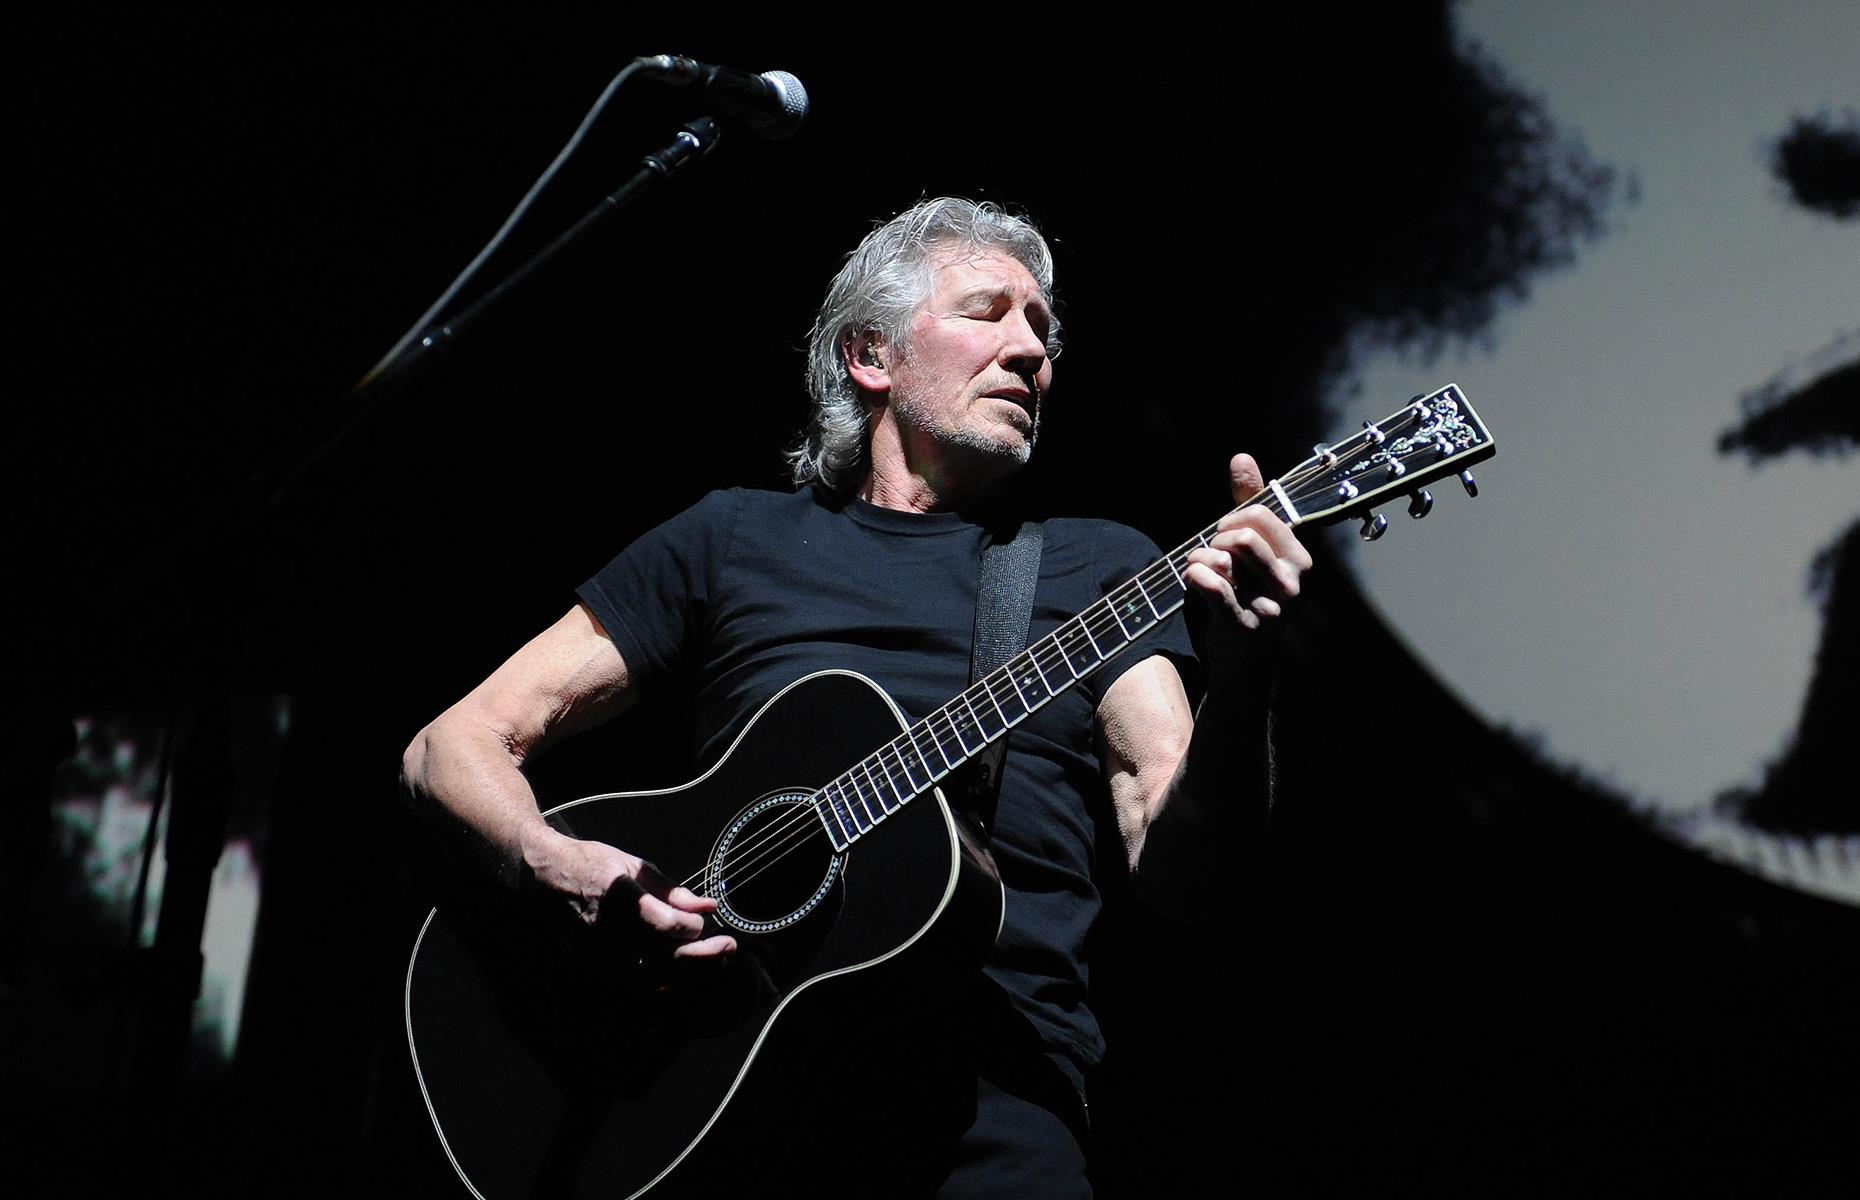 <p>Former Pink Floyd rocker Roger Waters took to the stage solo in 2010 when he embarked on his <em>The Wall Live</em> tour, marking the first time his eponymous album had been performed live in its entirety.</p>  <p>This epic tour spanned three years across North and South America, Europe, Australia, and New Zealand, with Waters captivating audiences during an incredible 219 shows that collectively grossed $459 million, a colossal $623 million today.</p>  <p>The trek surpassed the record set by Madonna's aforementioned <em>Sticky & Sweet Tour</em> as the highest-grossing by a solo artist at that time. Keep reading to discover which soloist concert tours went on to smash the record Waters set...</p>